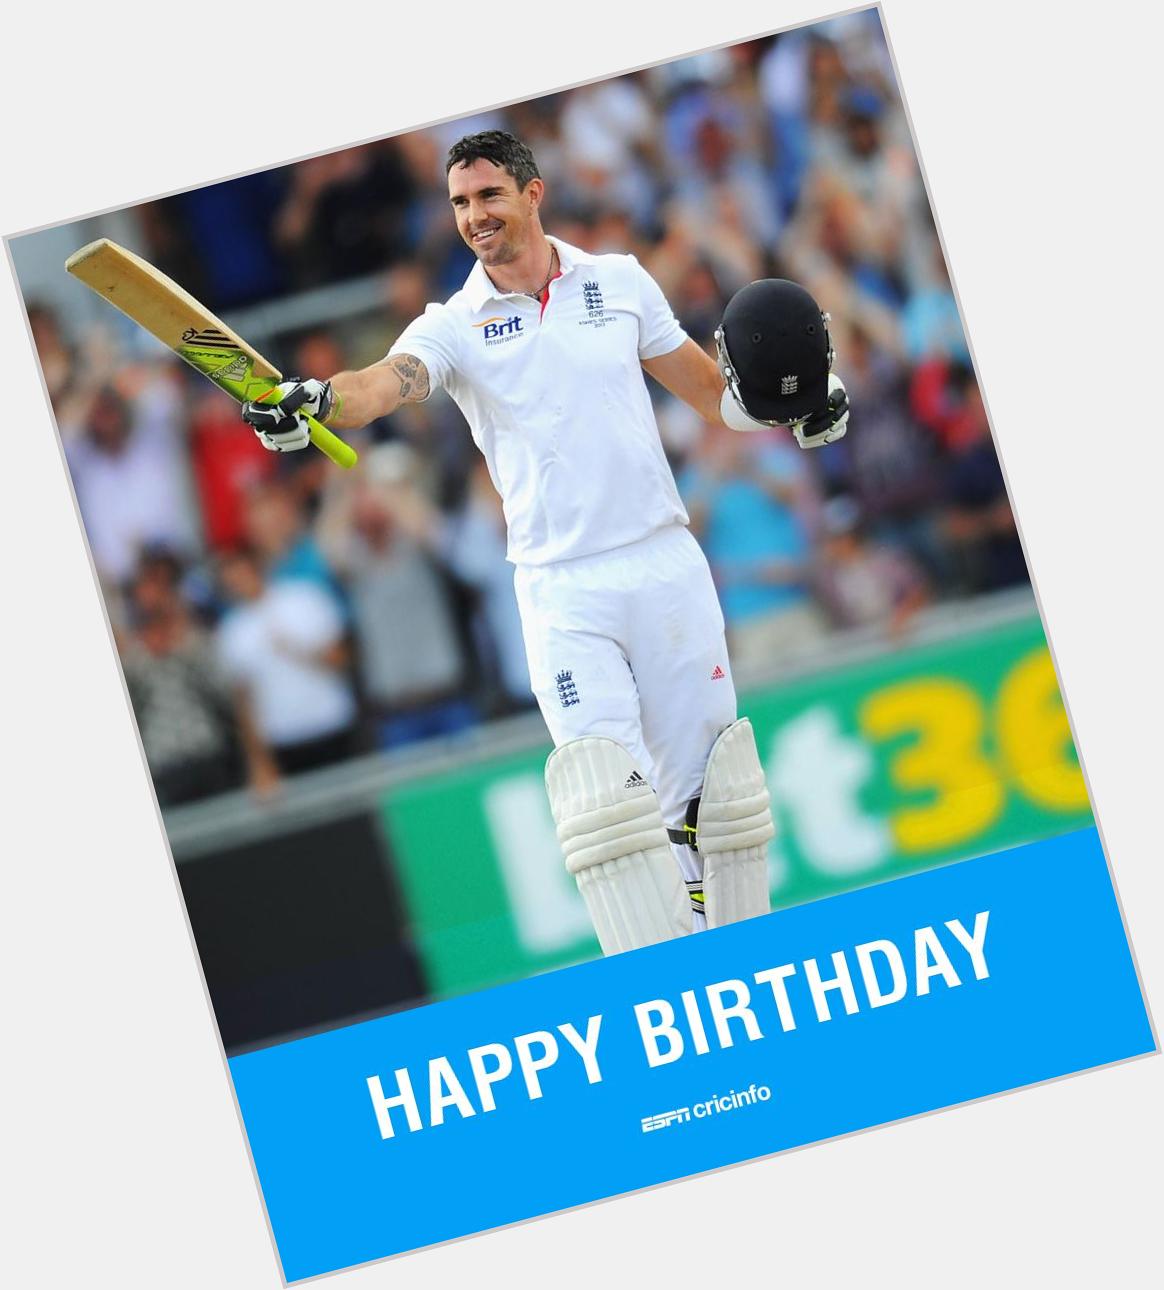  Happy Birthday Kevin Pietersen

Tell us your favourite innings 